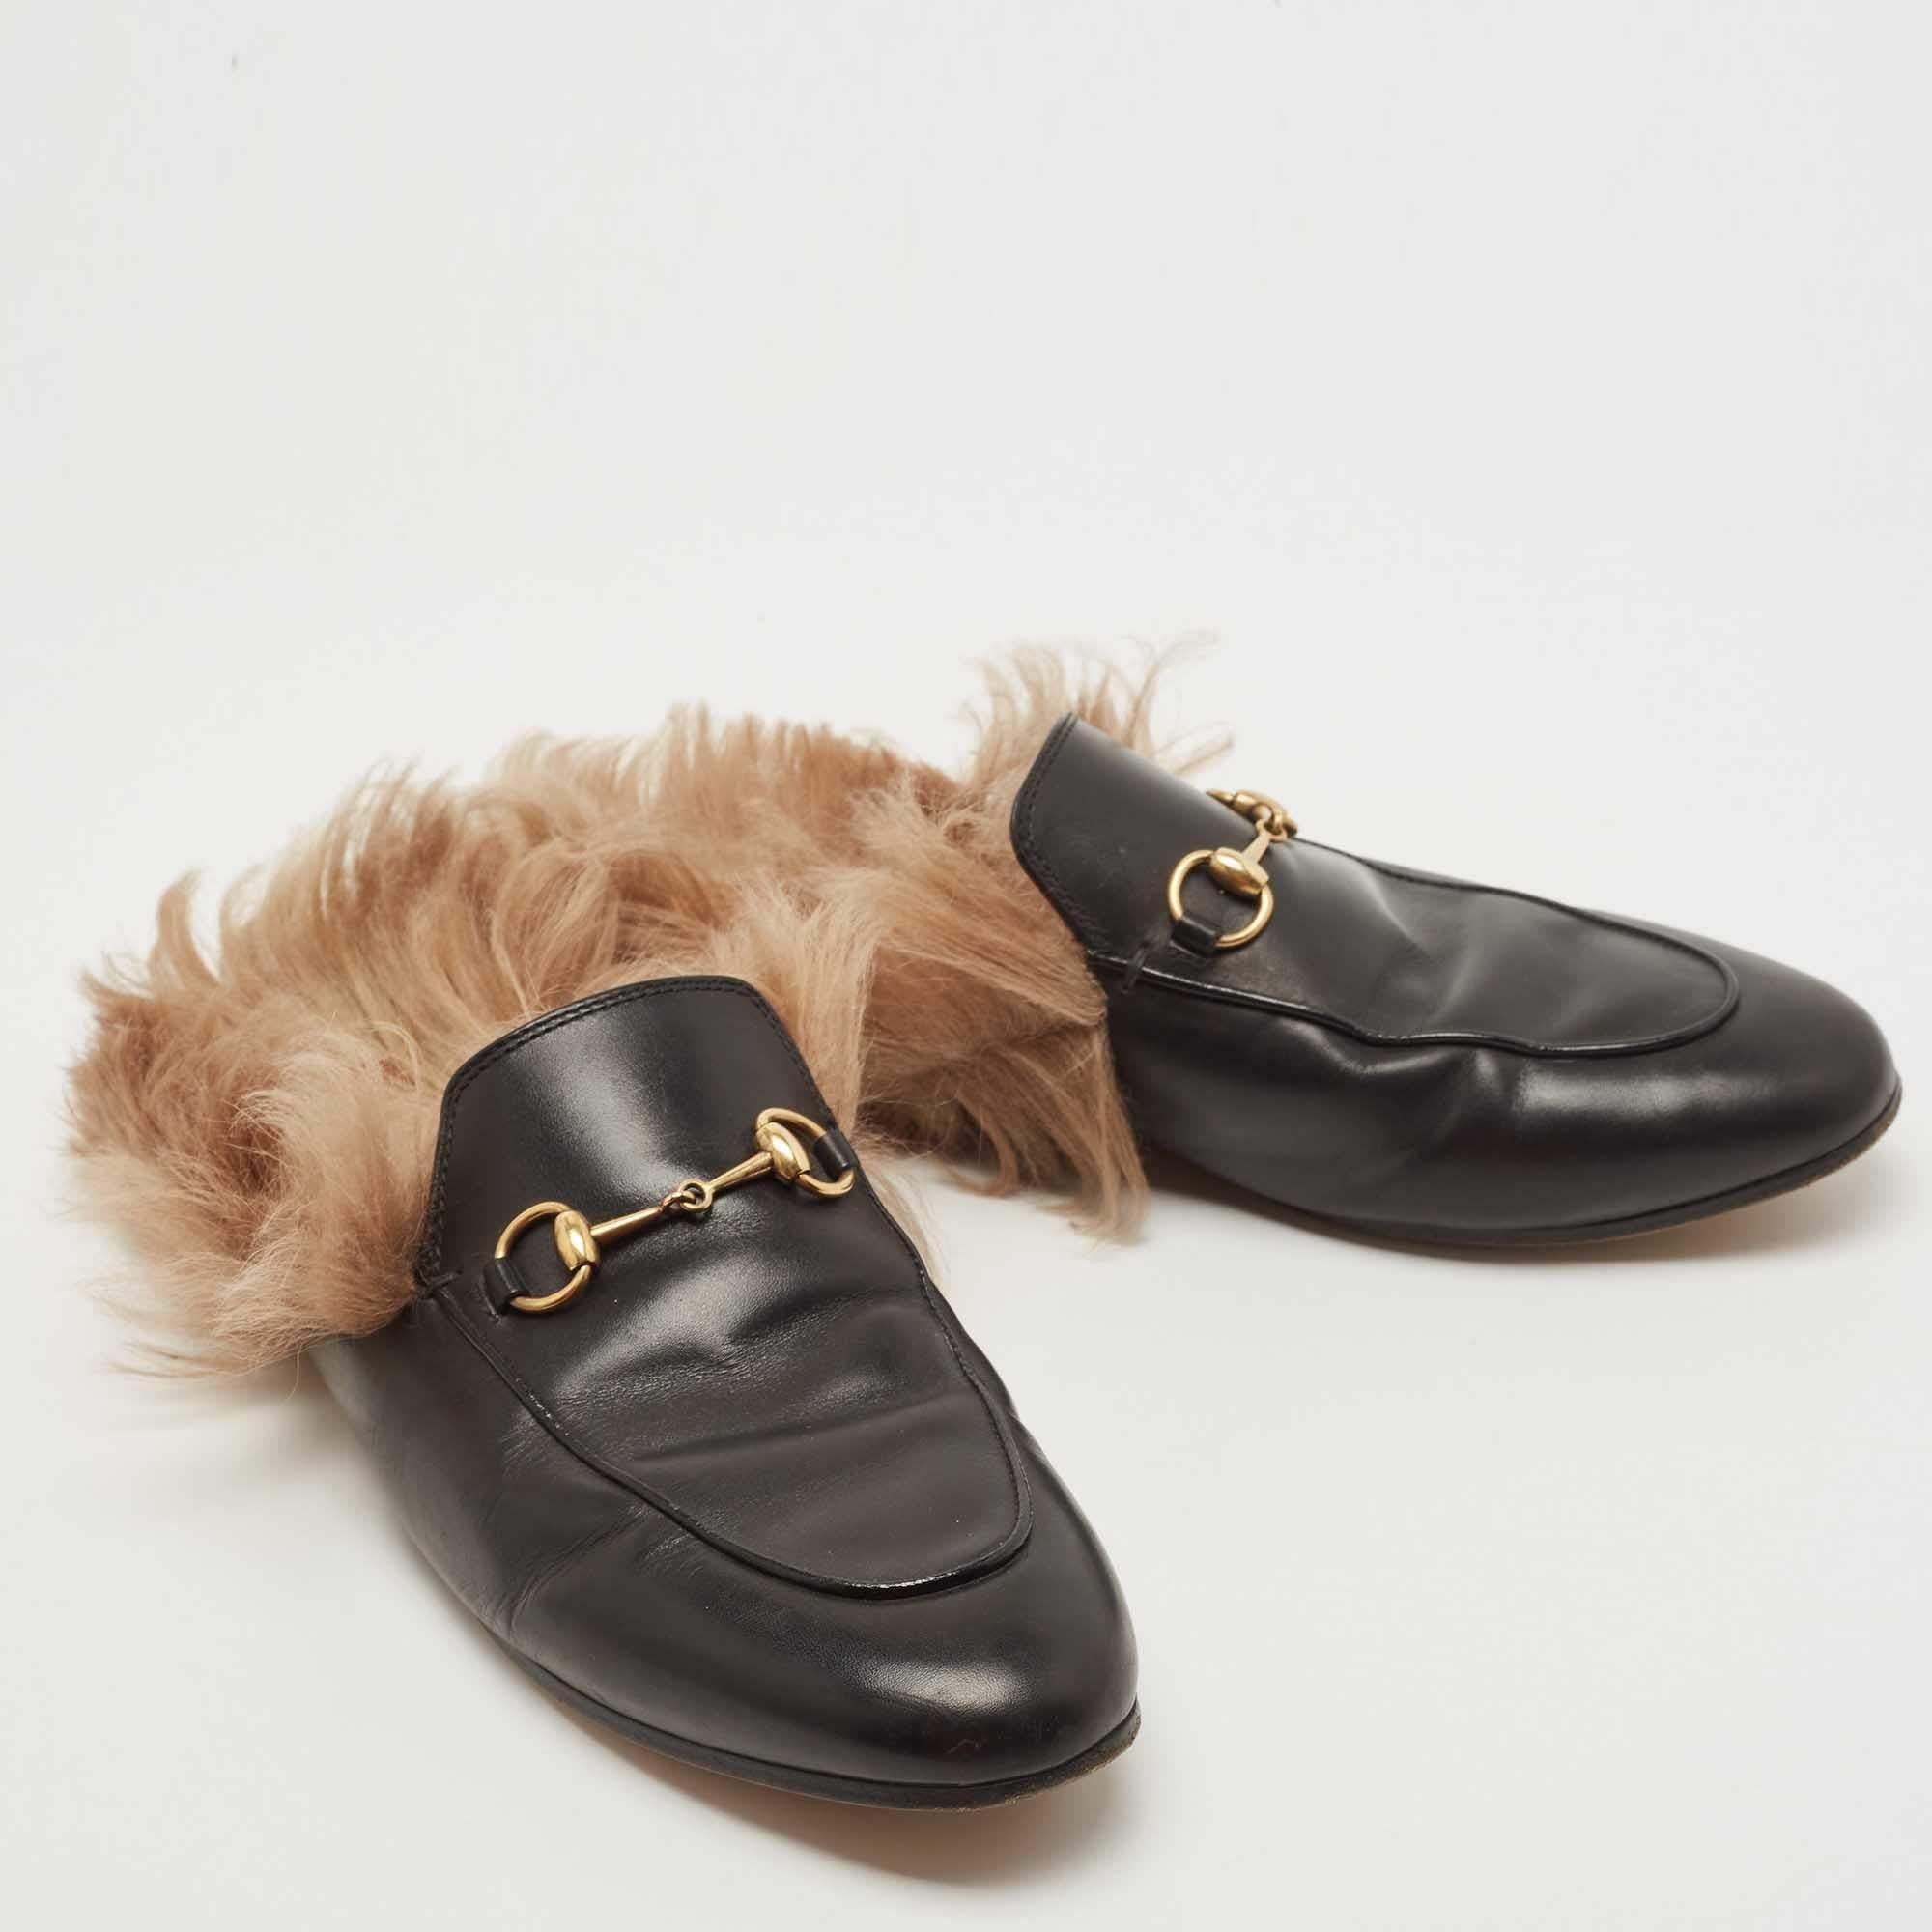 Women's Gucci Black Leather and Fur Princetown Flat Mules Size 39.5